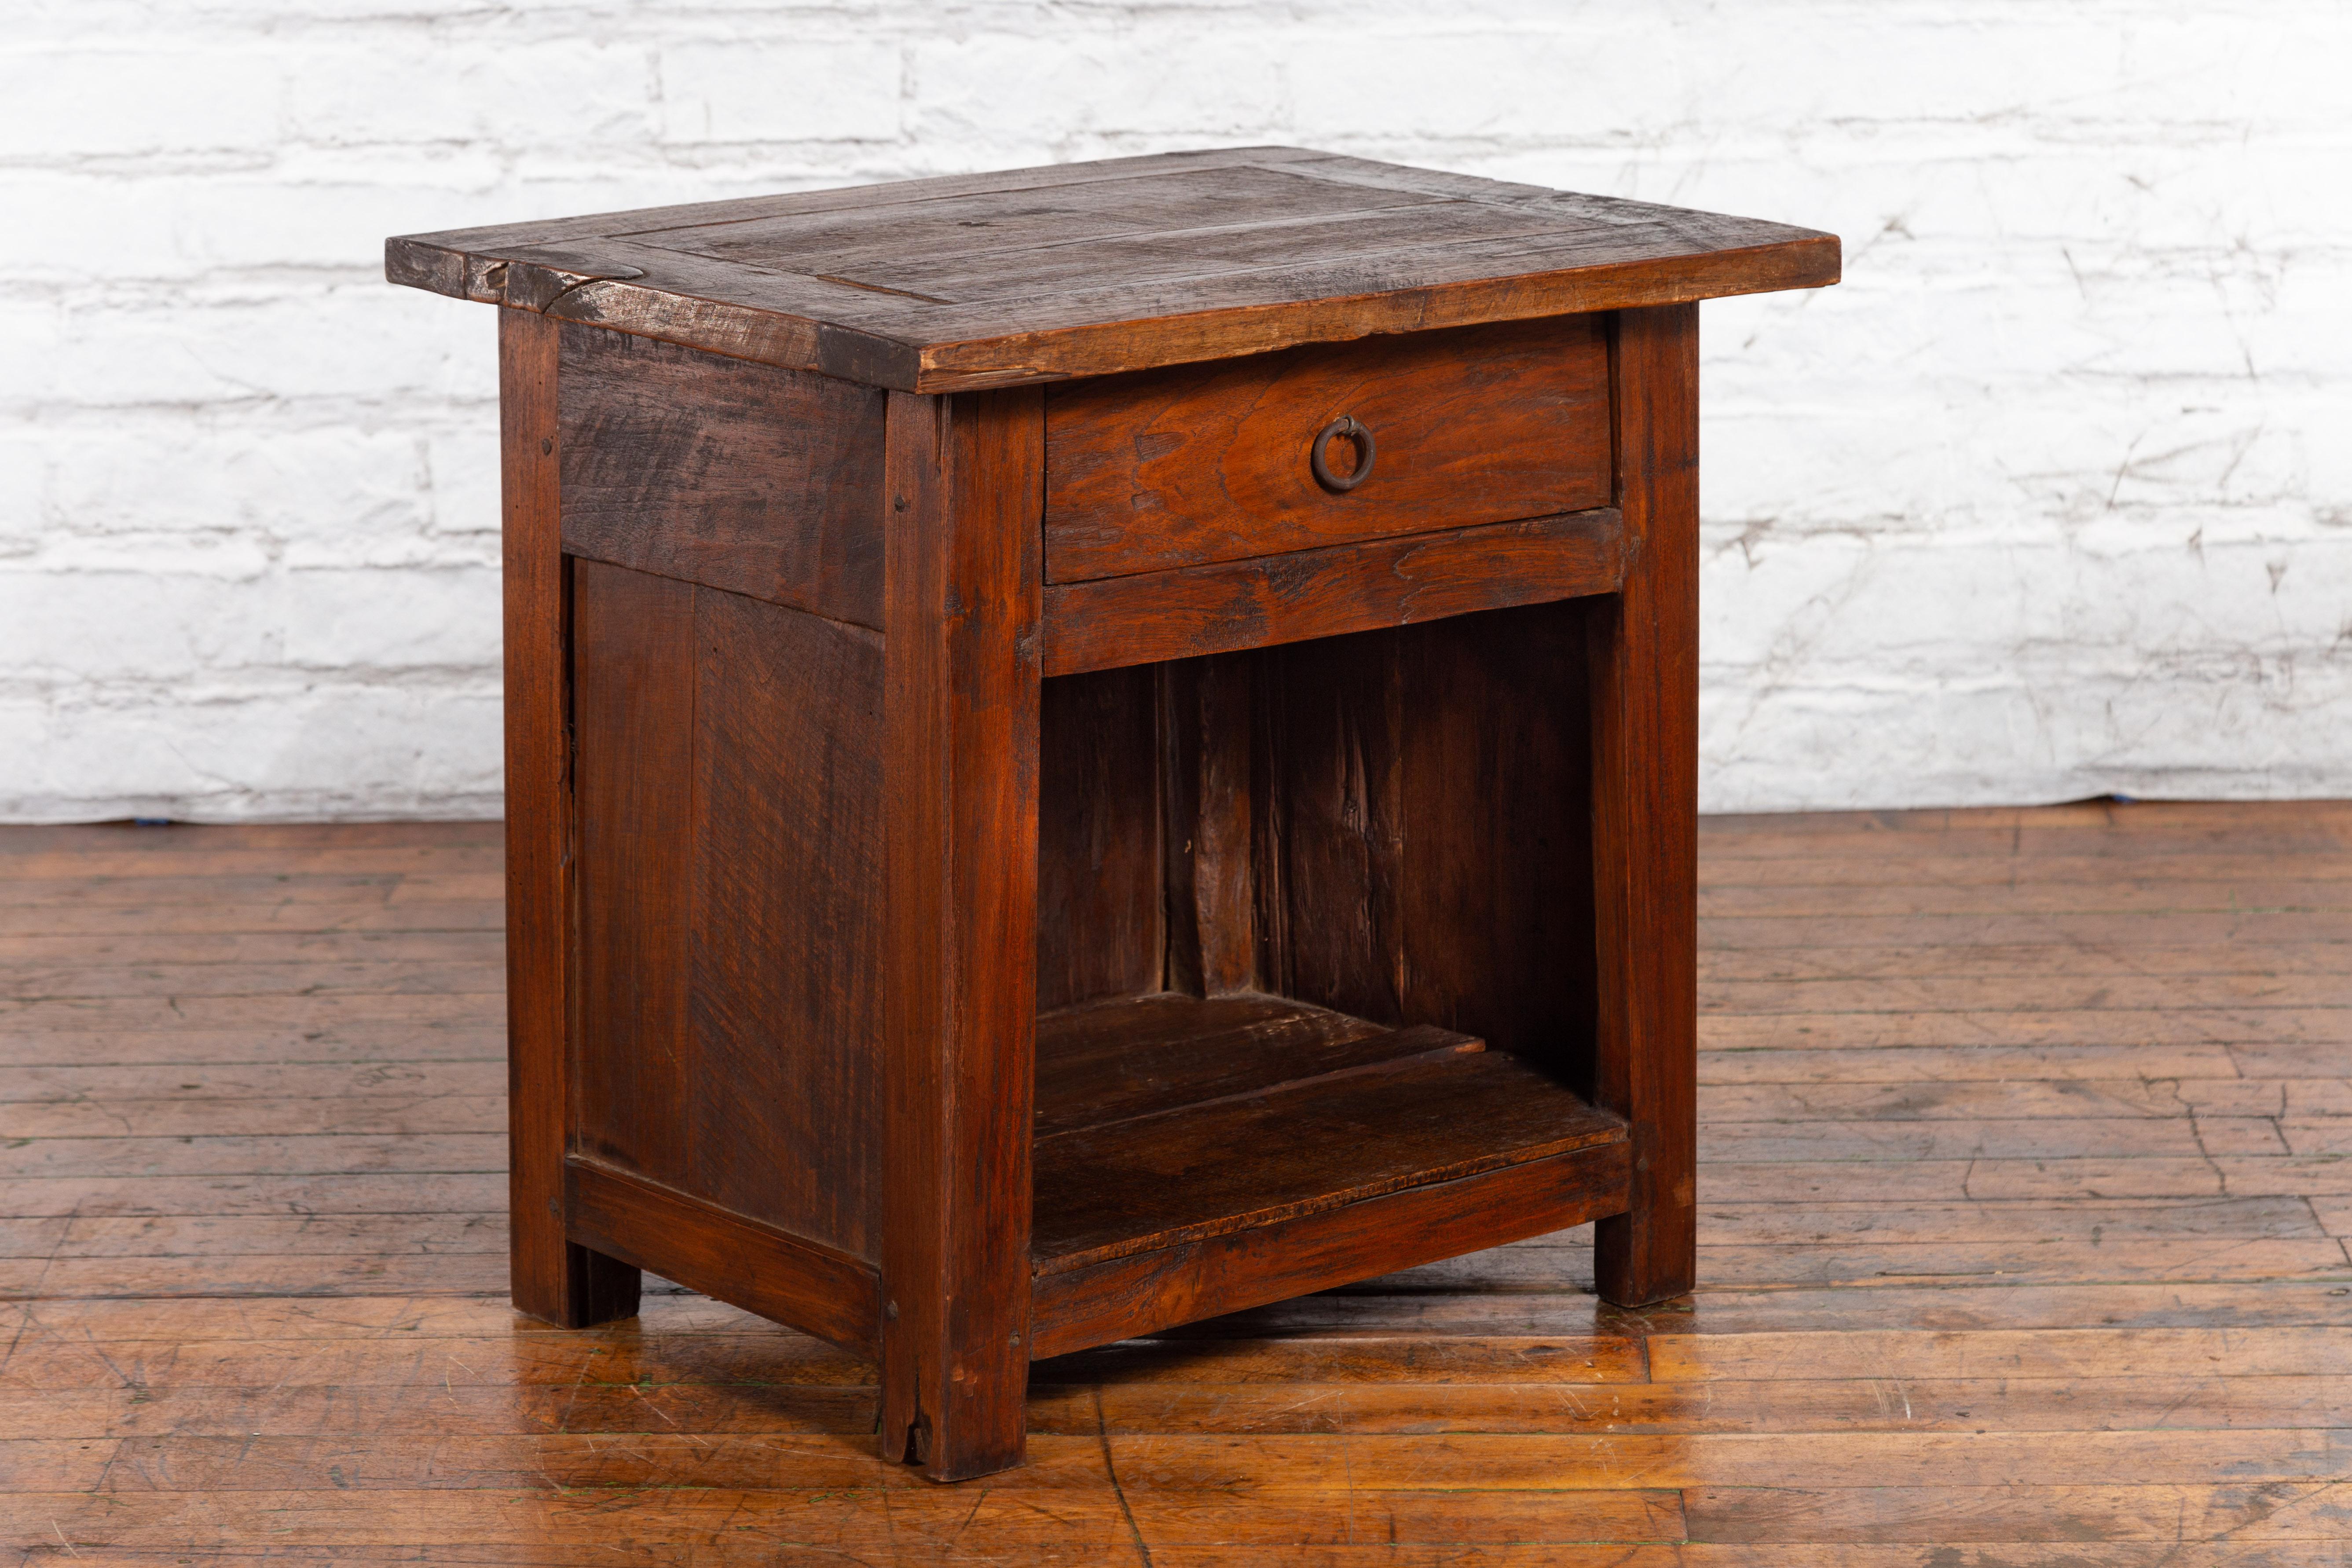 Javanese Early 20th Century Rustic Bedside Cabinet with Drawer and Open Shelf In Good Condition For Sale In Yonkers, NY